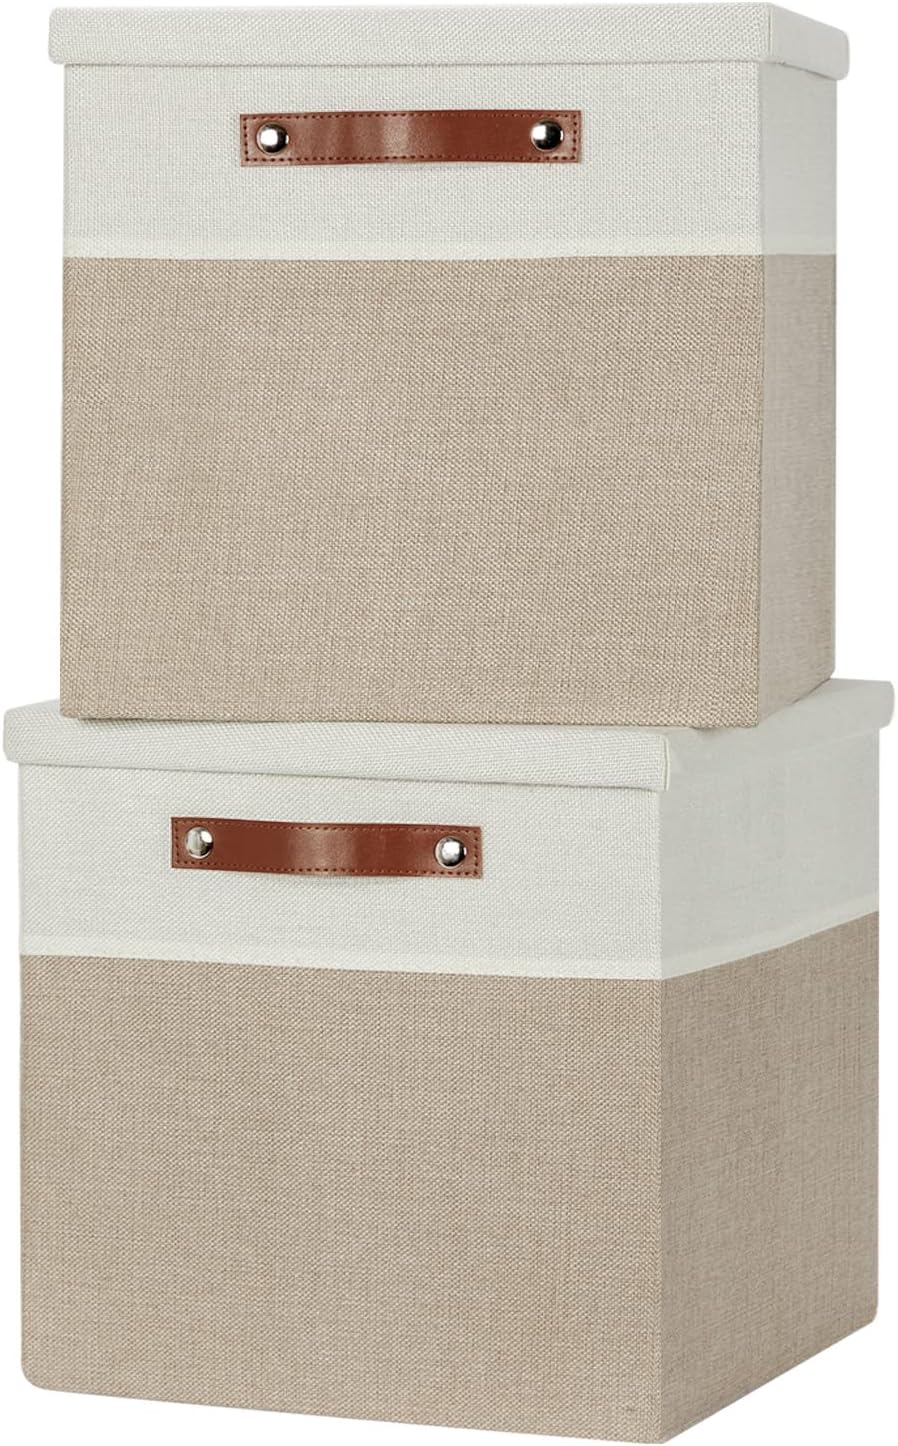 Temary Fabric Storage Bins with Lids 13 Inch Storage Cubes with Lid, Decorative Foldable Storage Boxes for Clothes, Closet Organizers (White&Khaki, 13x13x13inch)